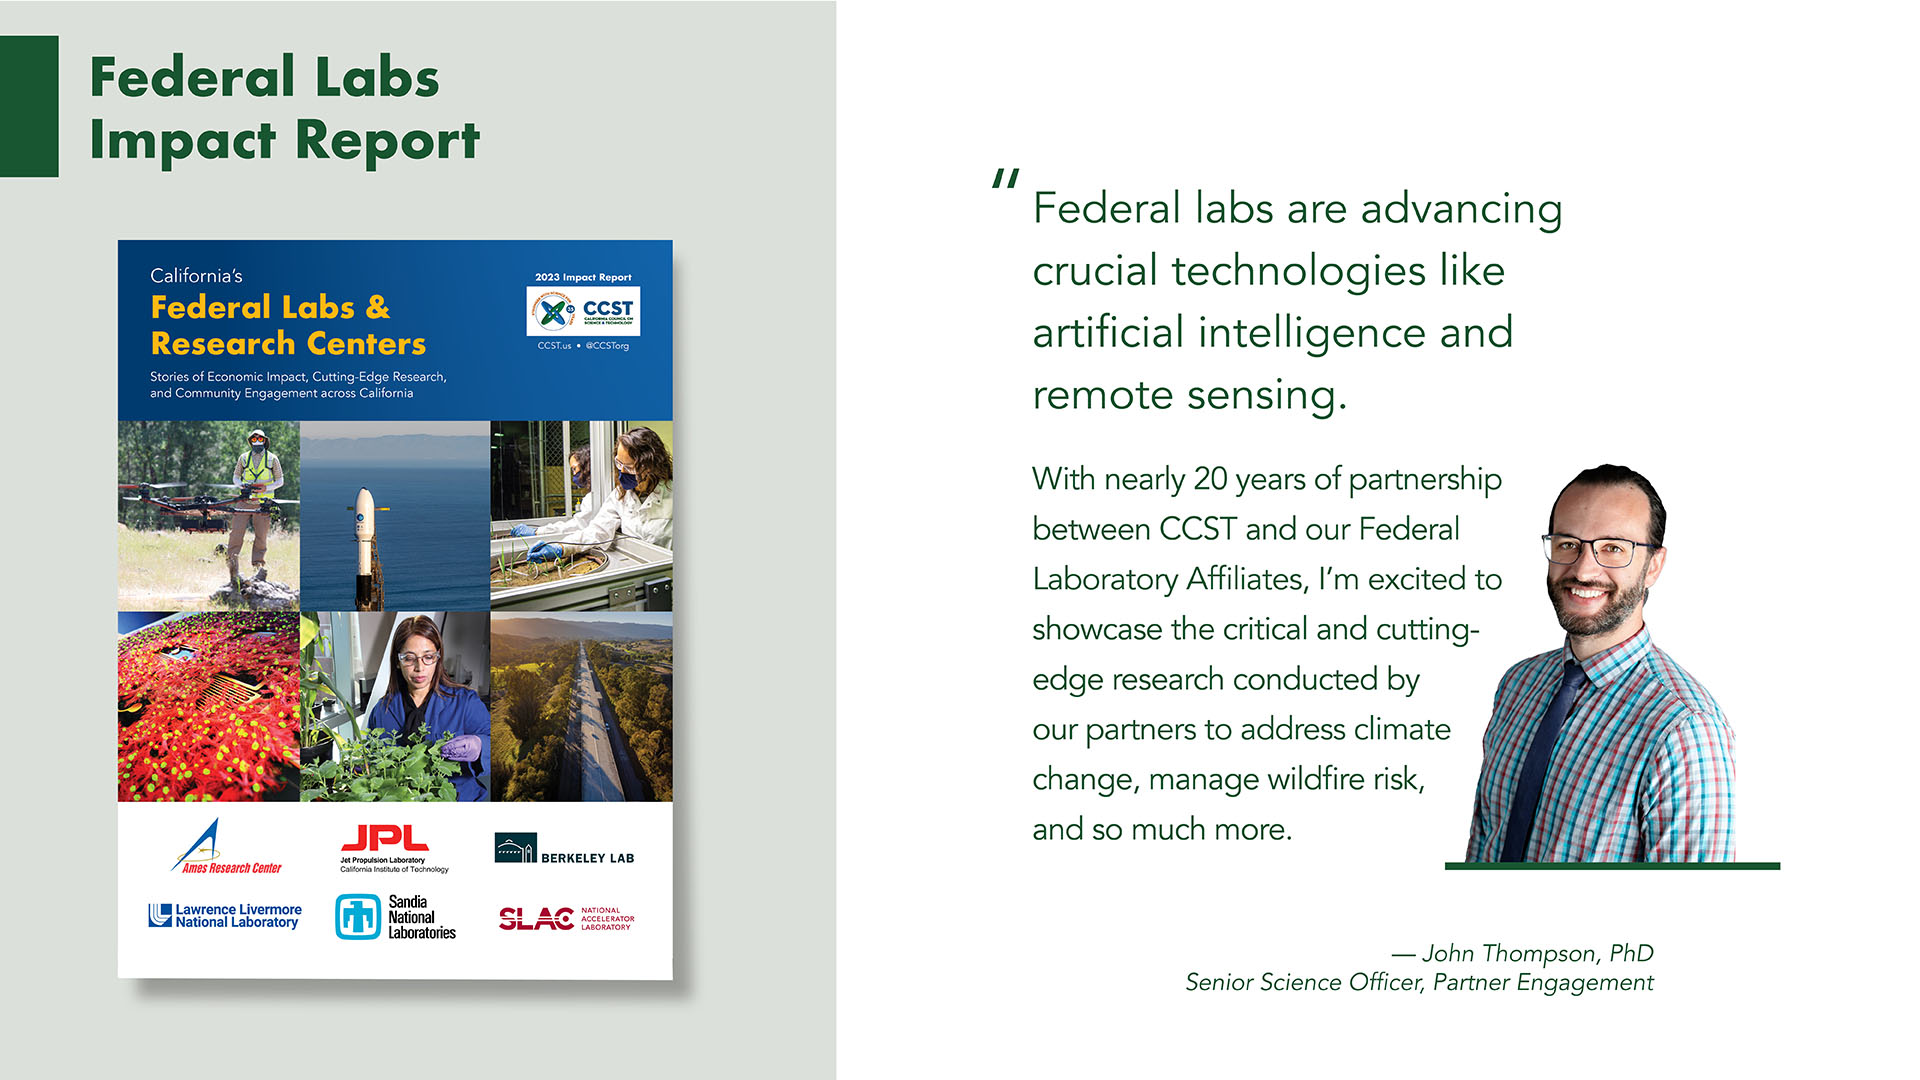 A large image of the Federal Labs Impact Report cover on the left column with a light green background, and a quote on the right column with an image of John Thompson: "Federal labs are advancing crucial technologies like artificial intelligence and remote sensing. With nearly 20 years of partnership between CCST and our Federal Laboratory Affiliates, I’m excited to showcase the critical and cutting-edge research conducted by our partners to address climate change, manage wildfire risk, and so much more."